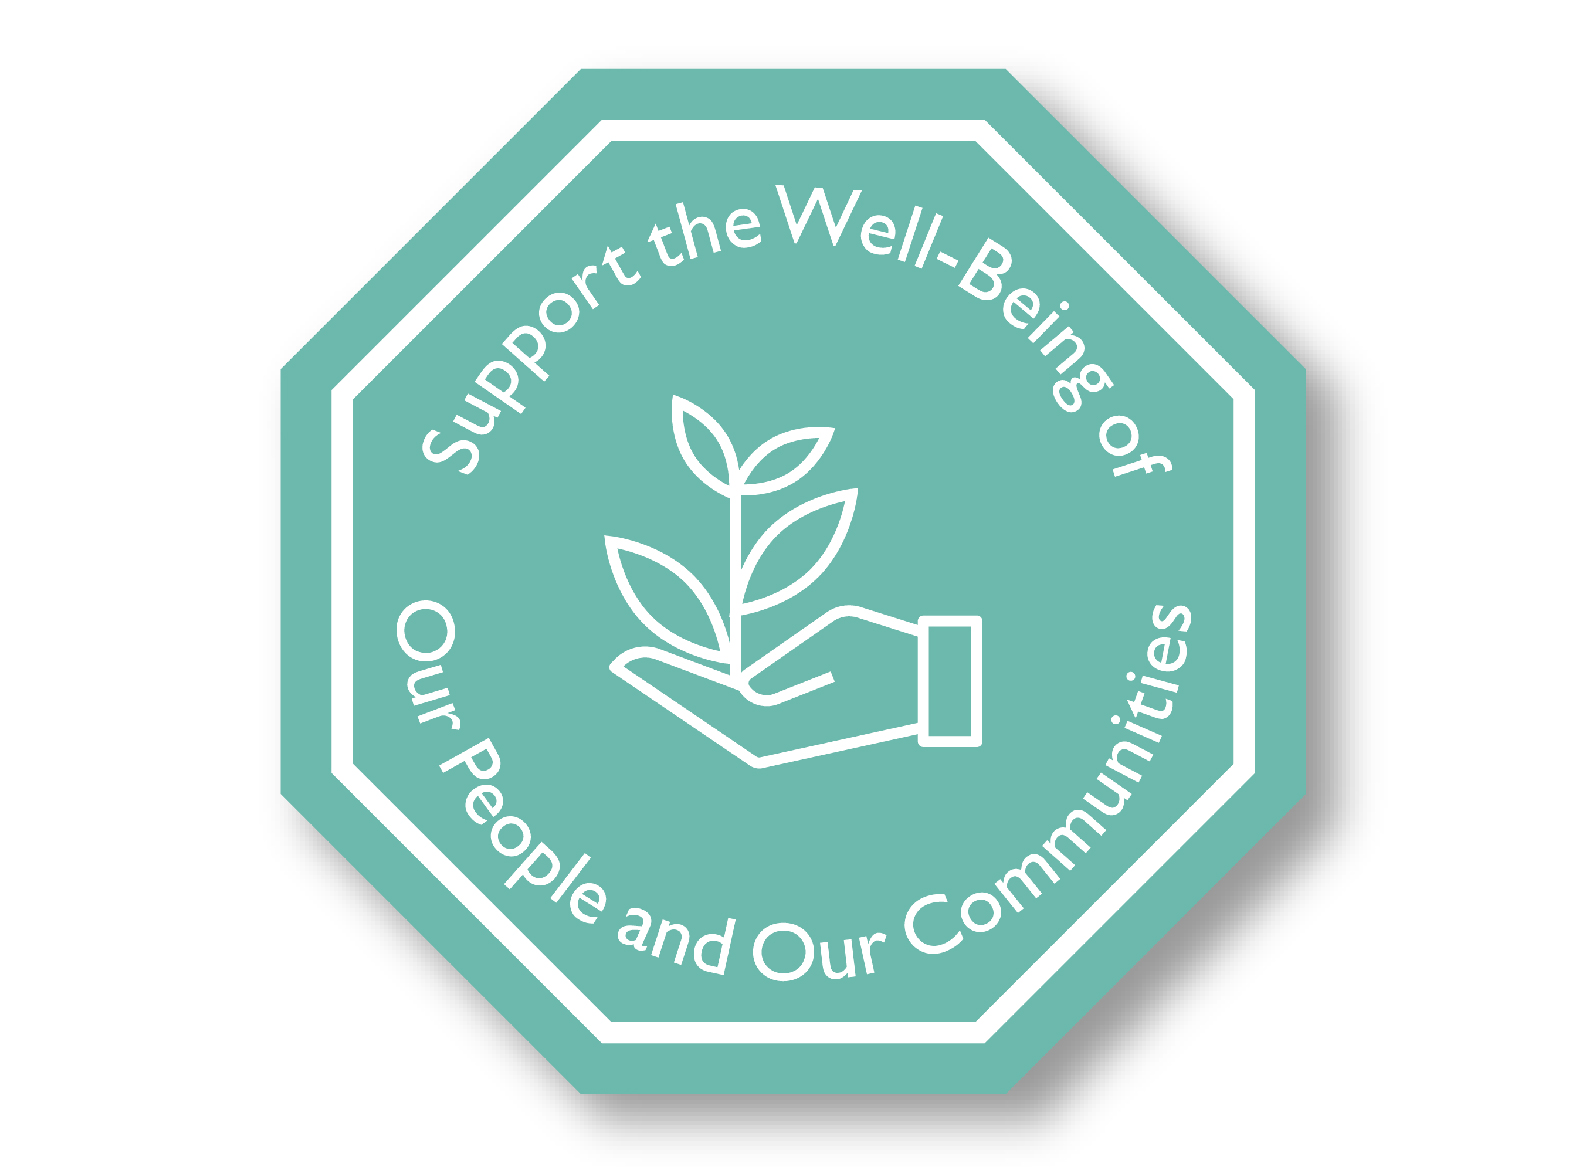 Support the wellbeing of our people and our communities